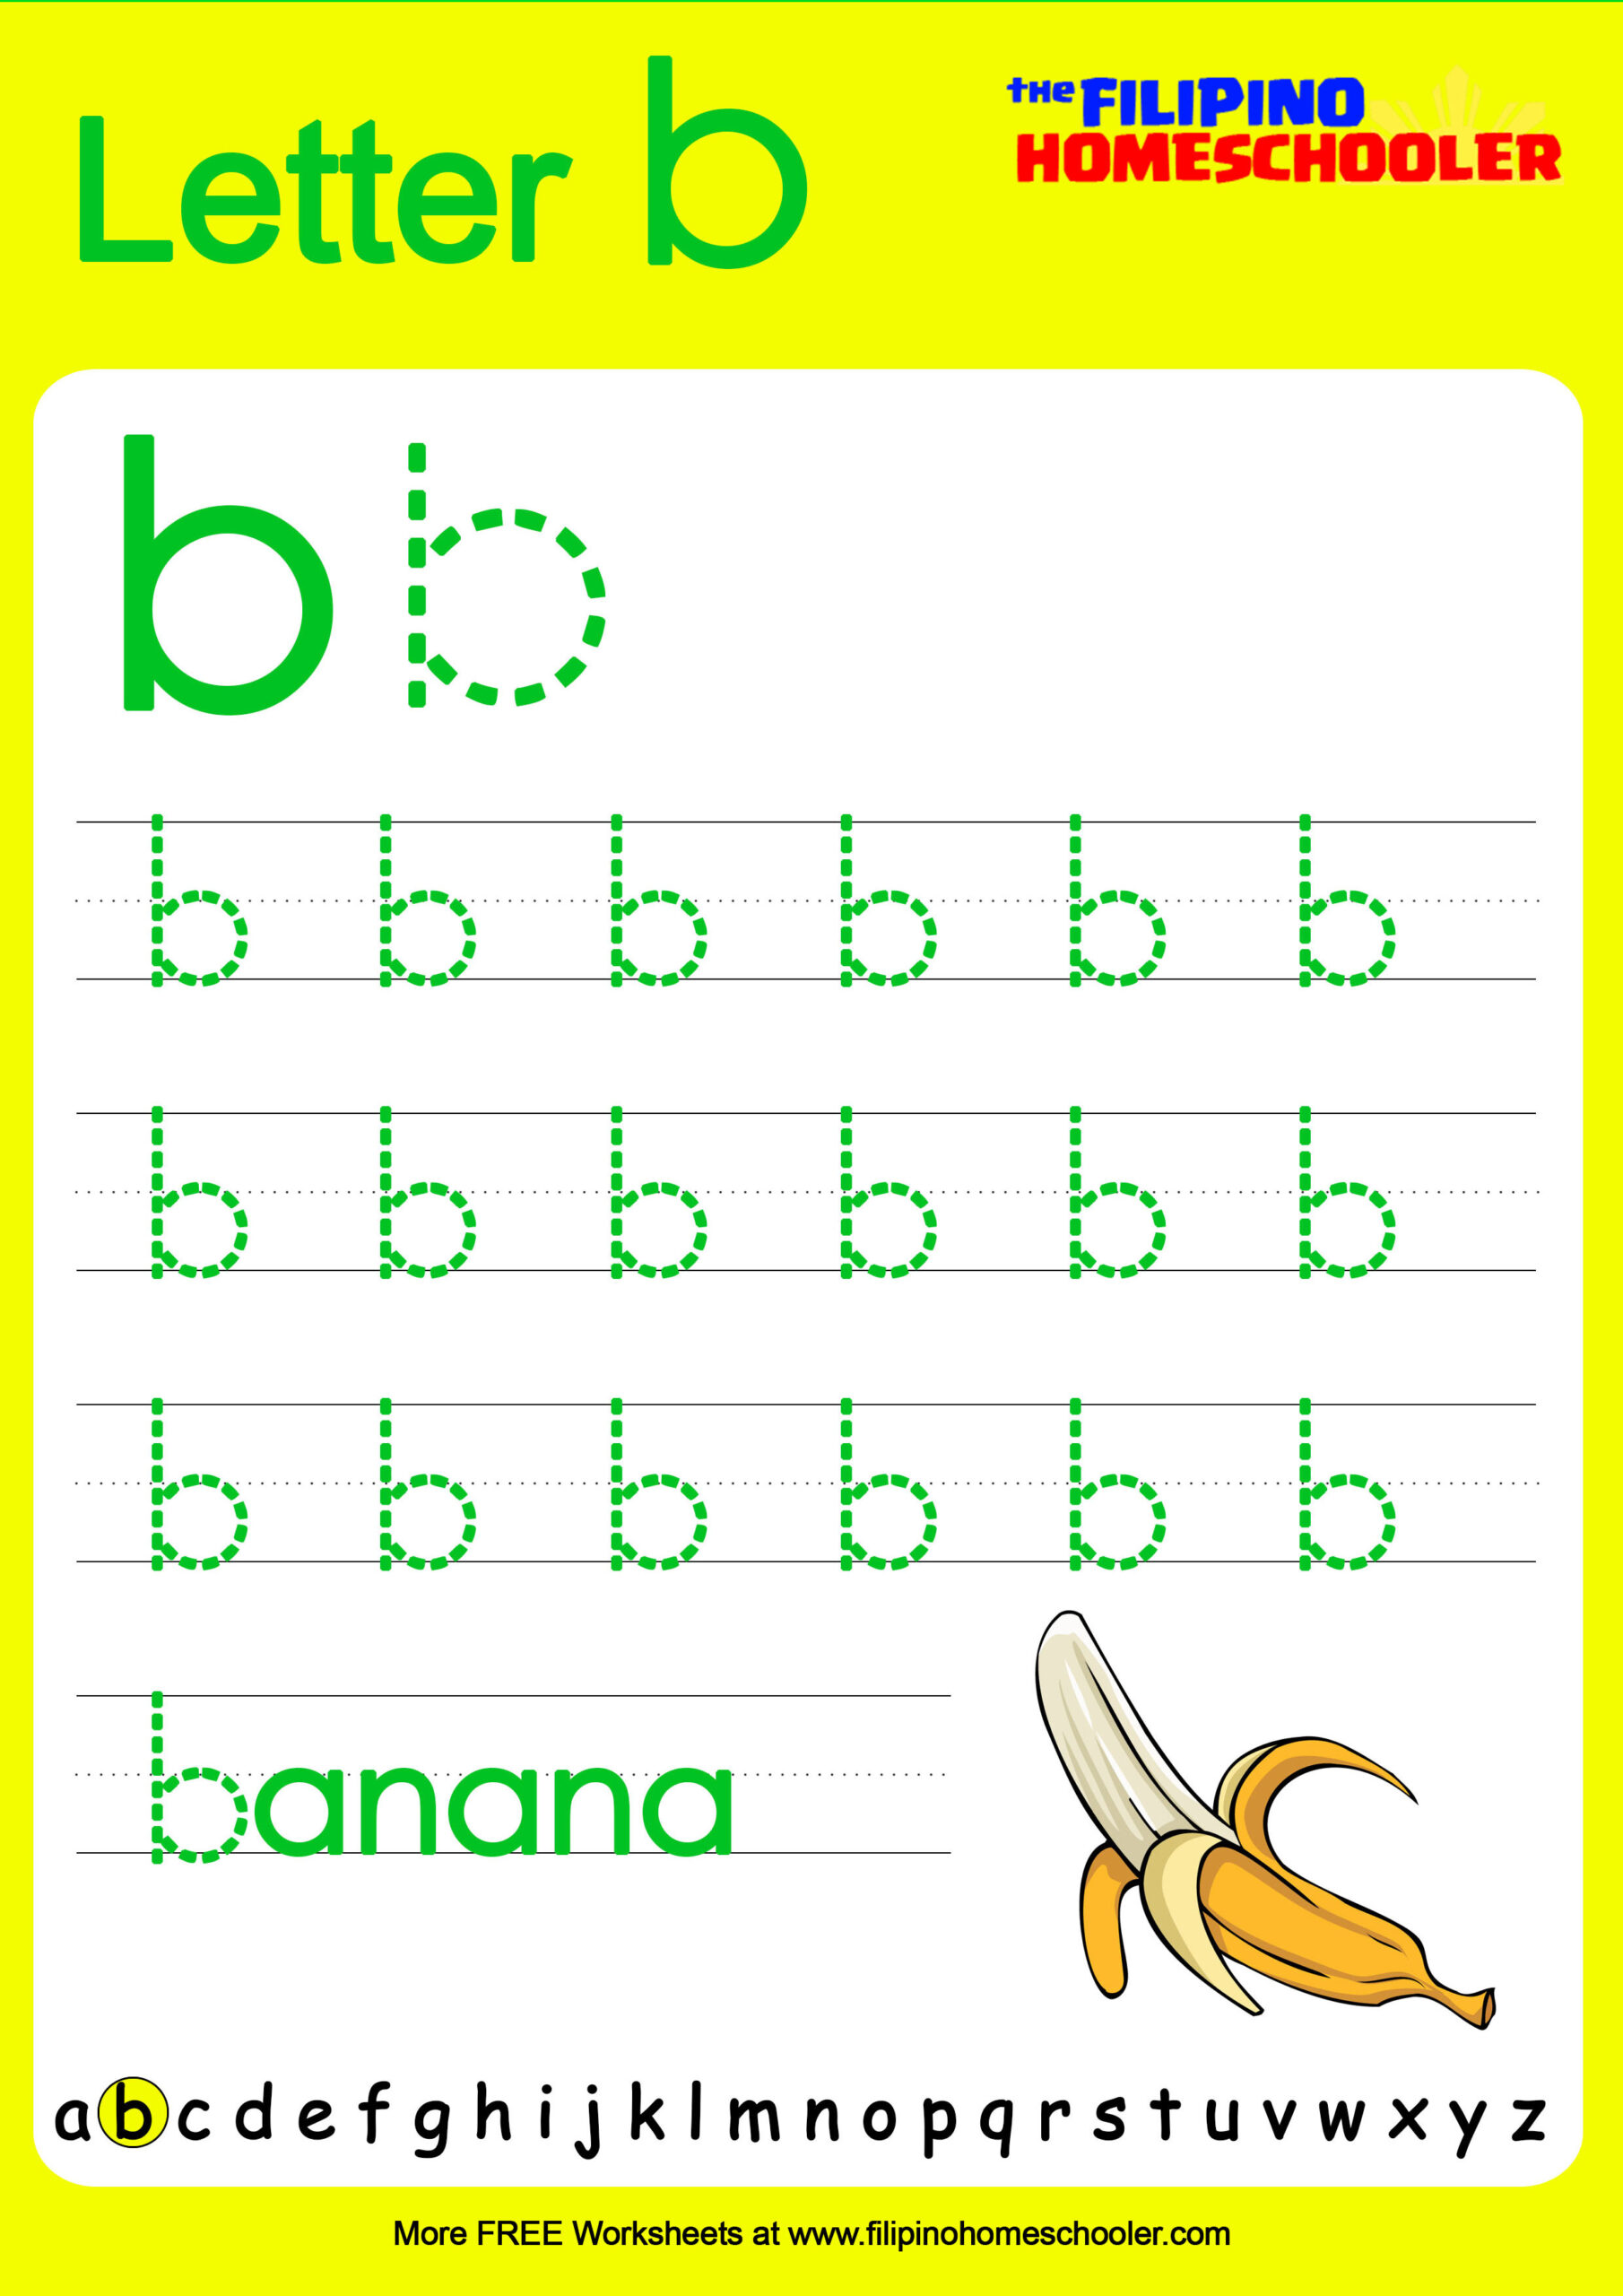 Free Lowercase Letter Tracing Worksheets — The Filipino throughout Alphabet Tracing Worksheets Lowercase